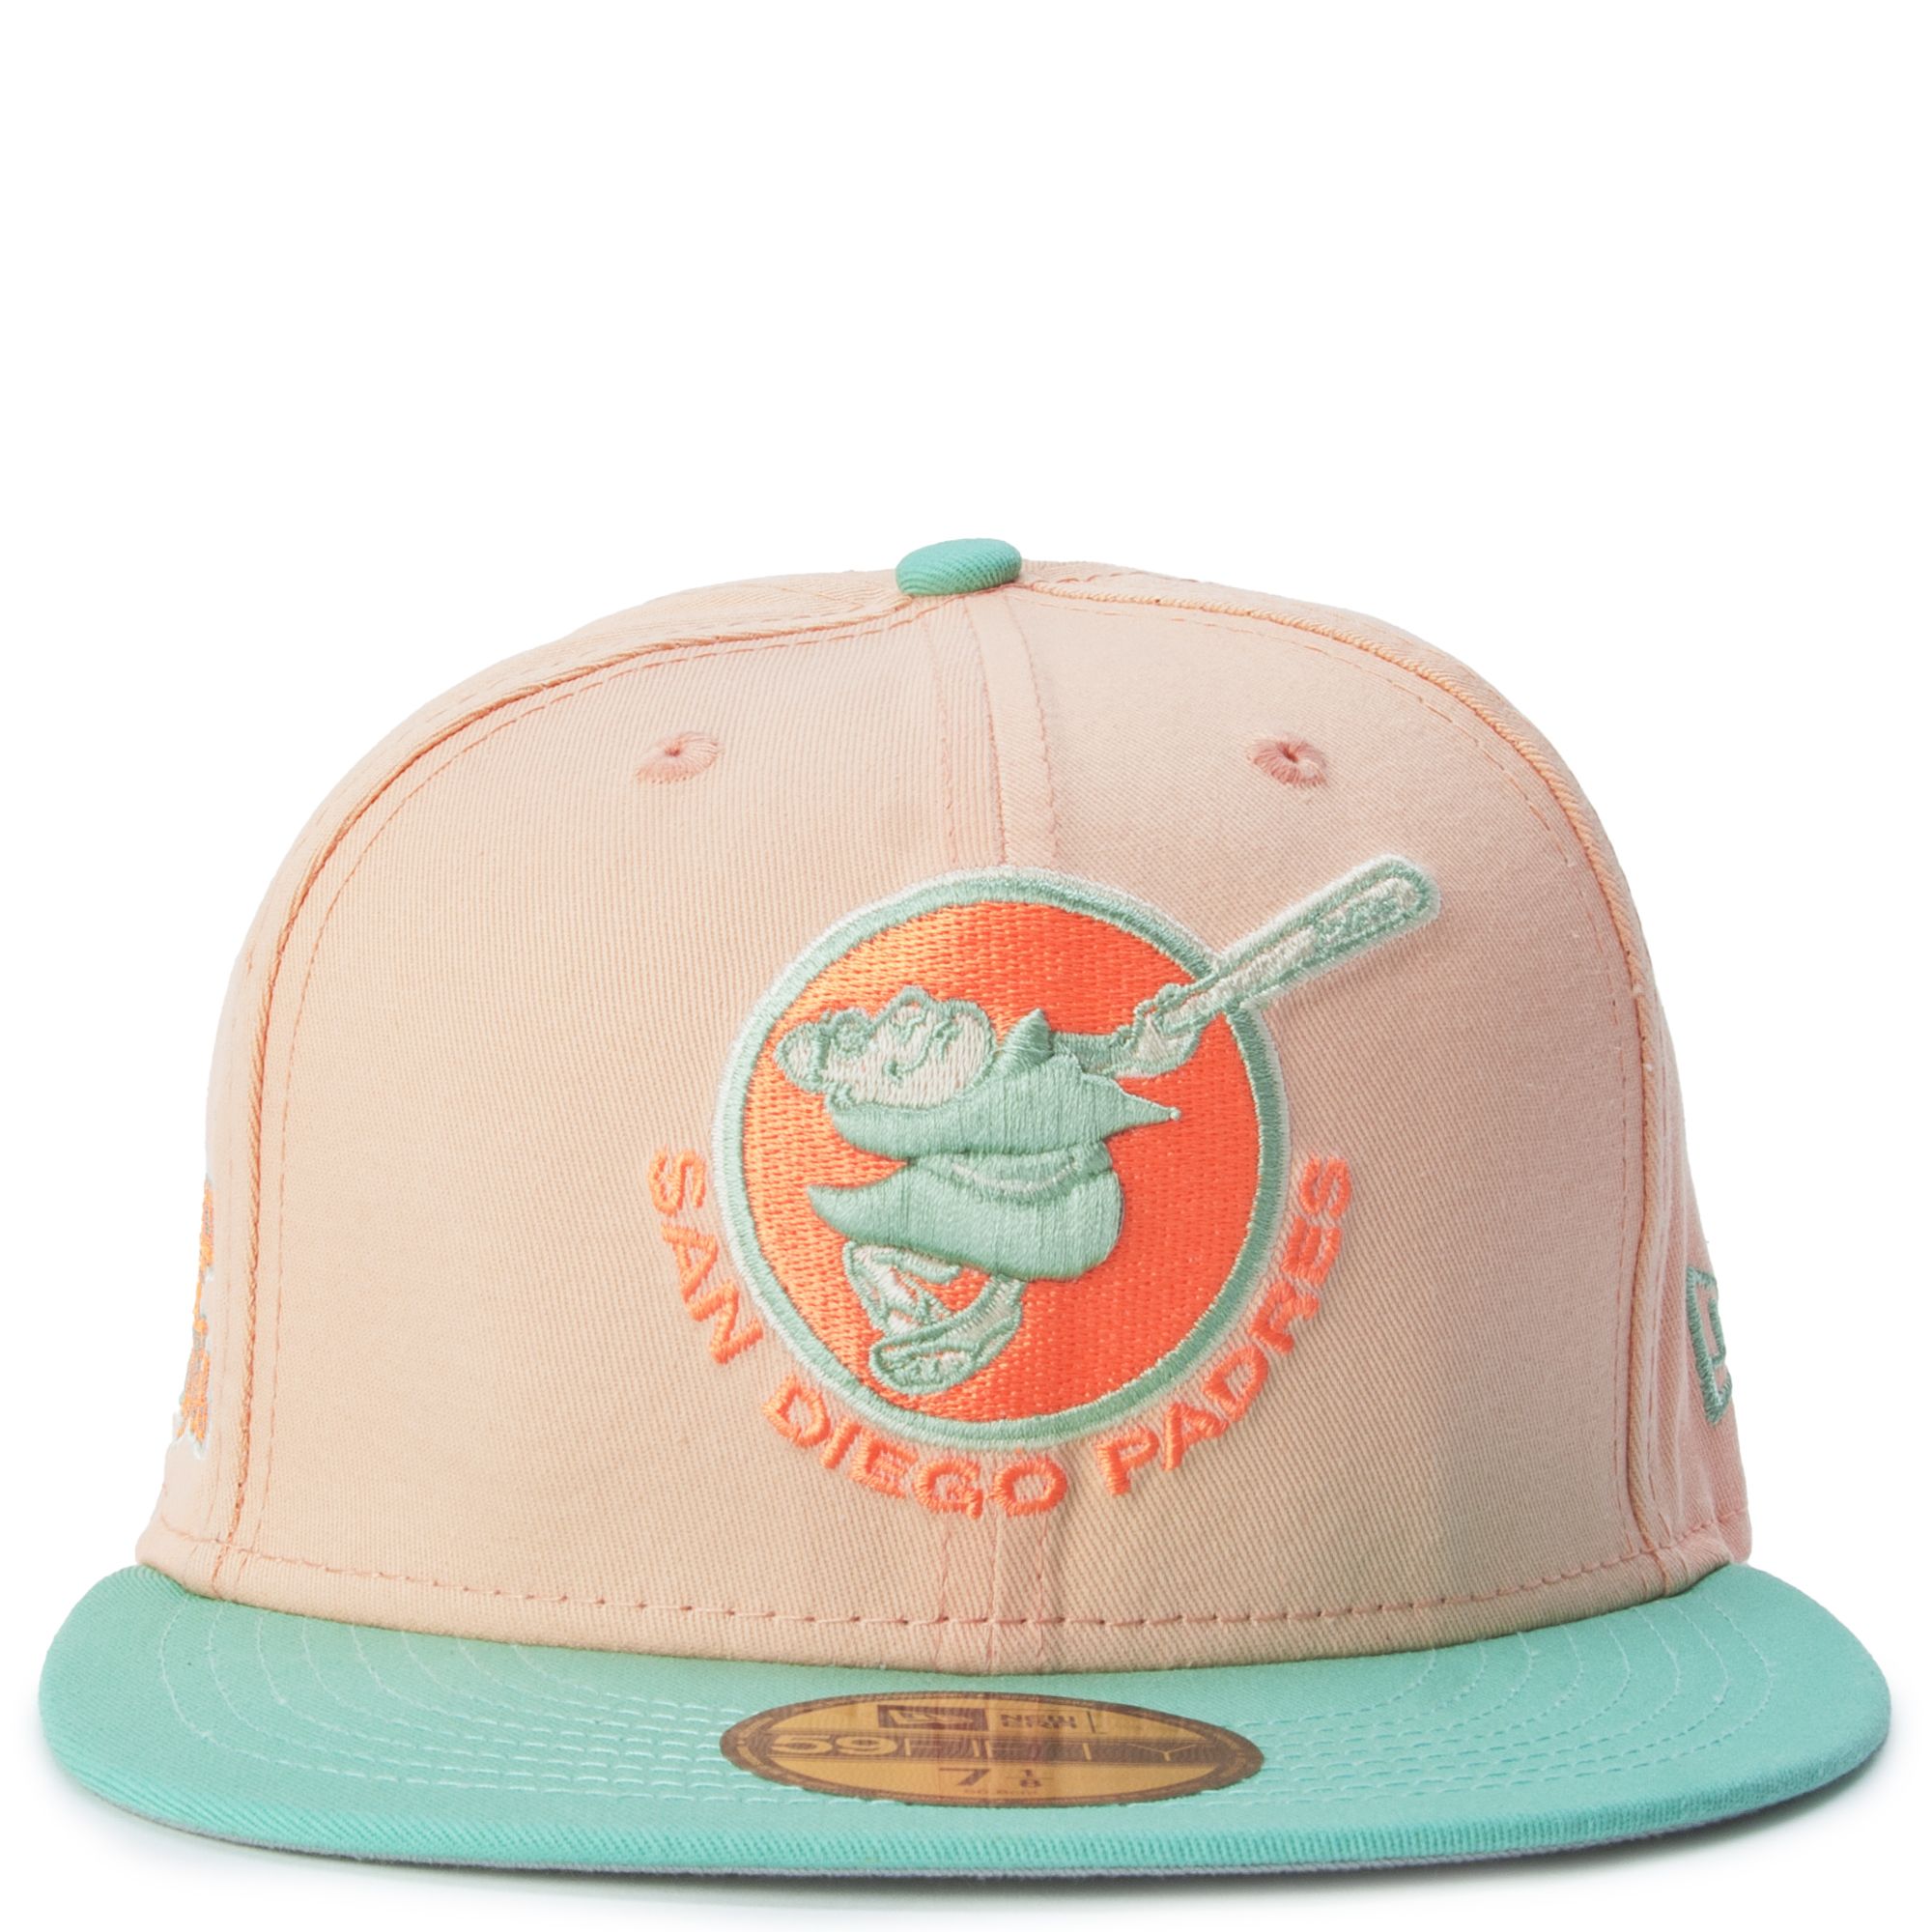 SAN DIEGO PADRES PEACH MINT 59FIFTY FITTED HAT 70725293